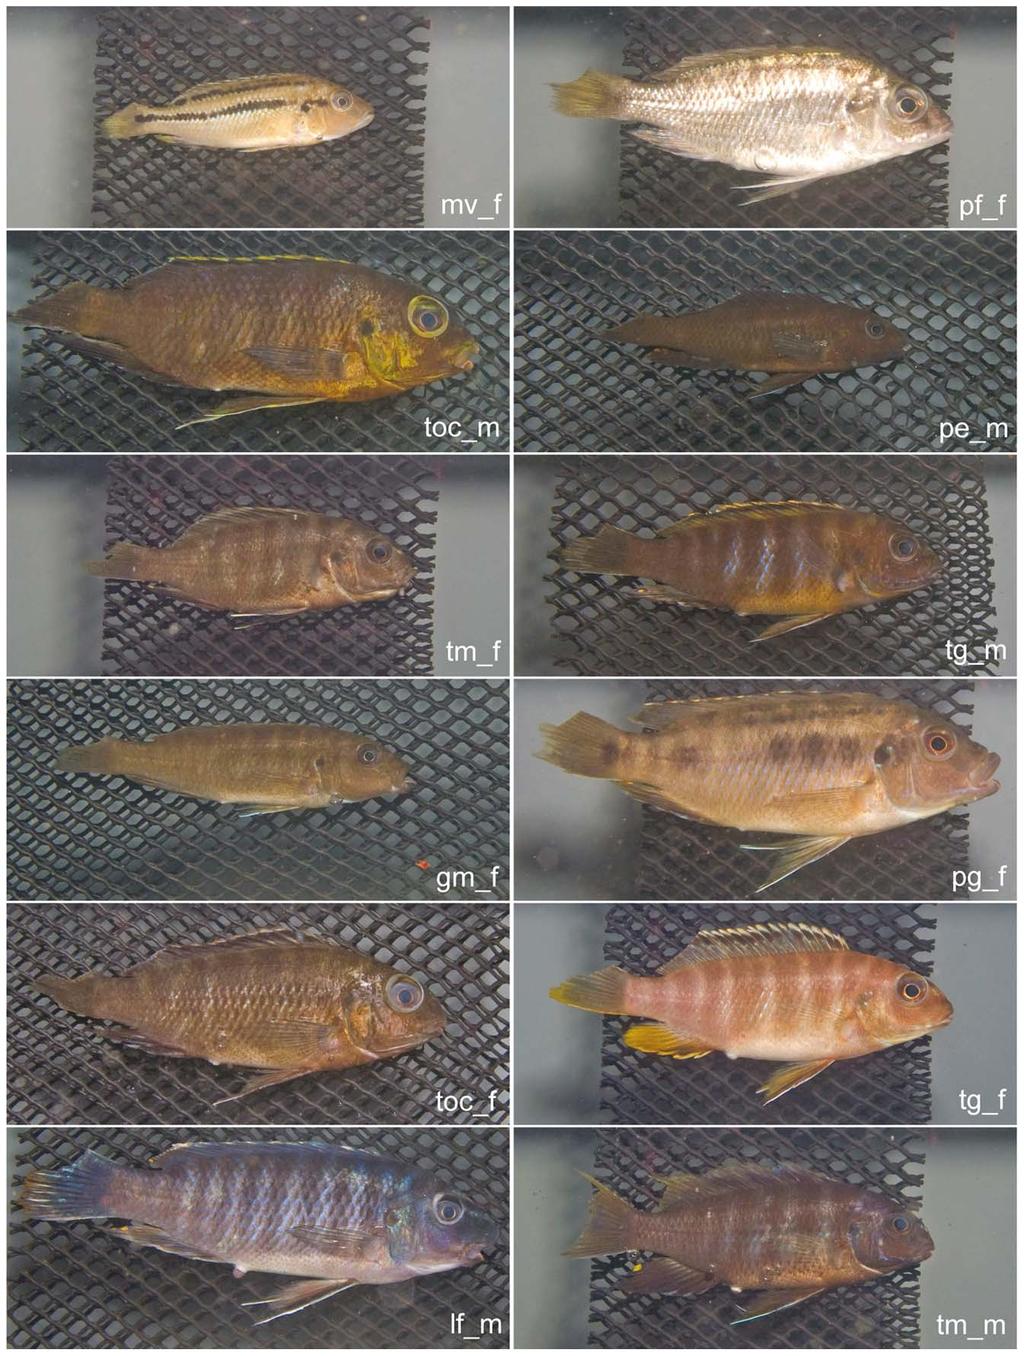 The name tags in the lower right portion of each photograph are combinations of the abbreviation of species names (Table 1), followed by m for male and f for female. doi:10.1371/journal.pone.0077686.